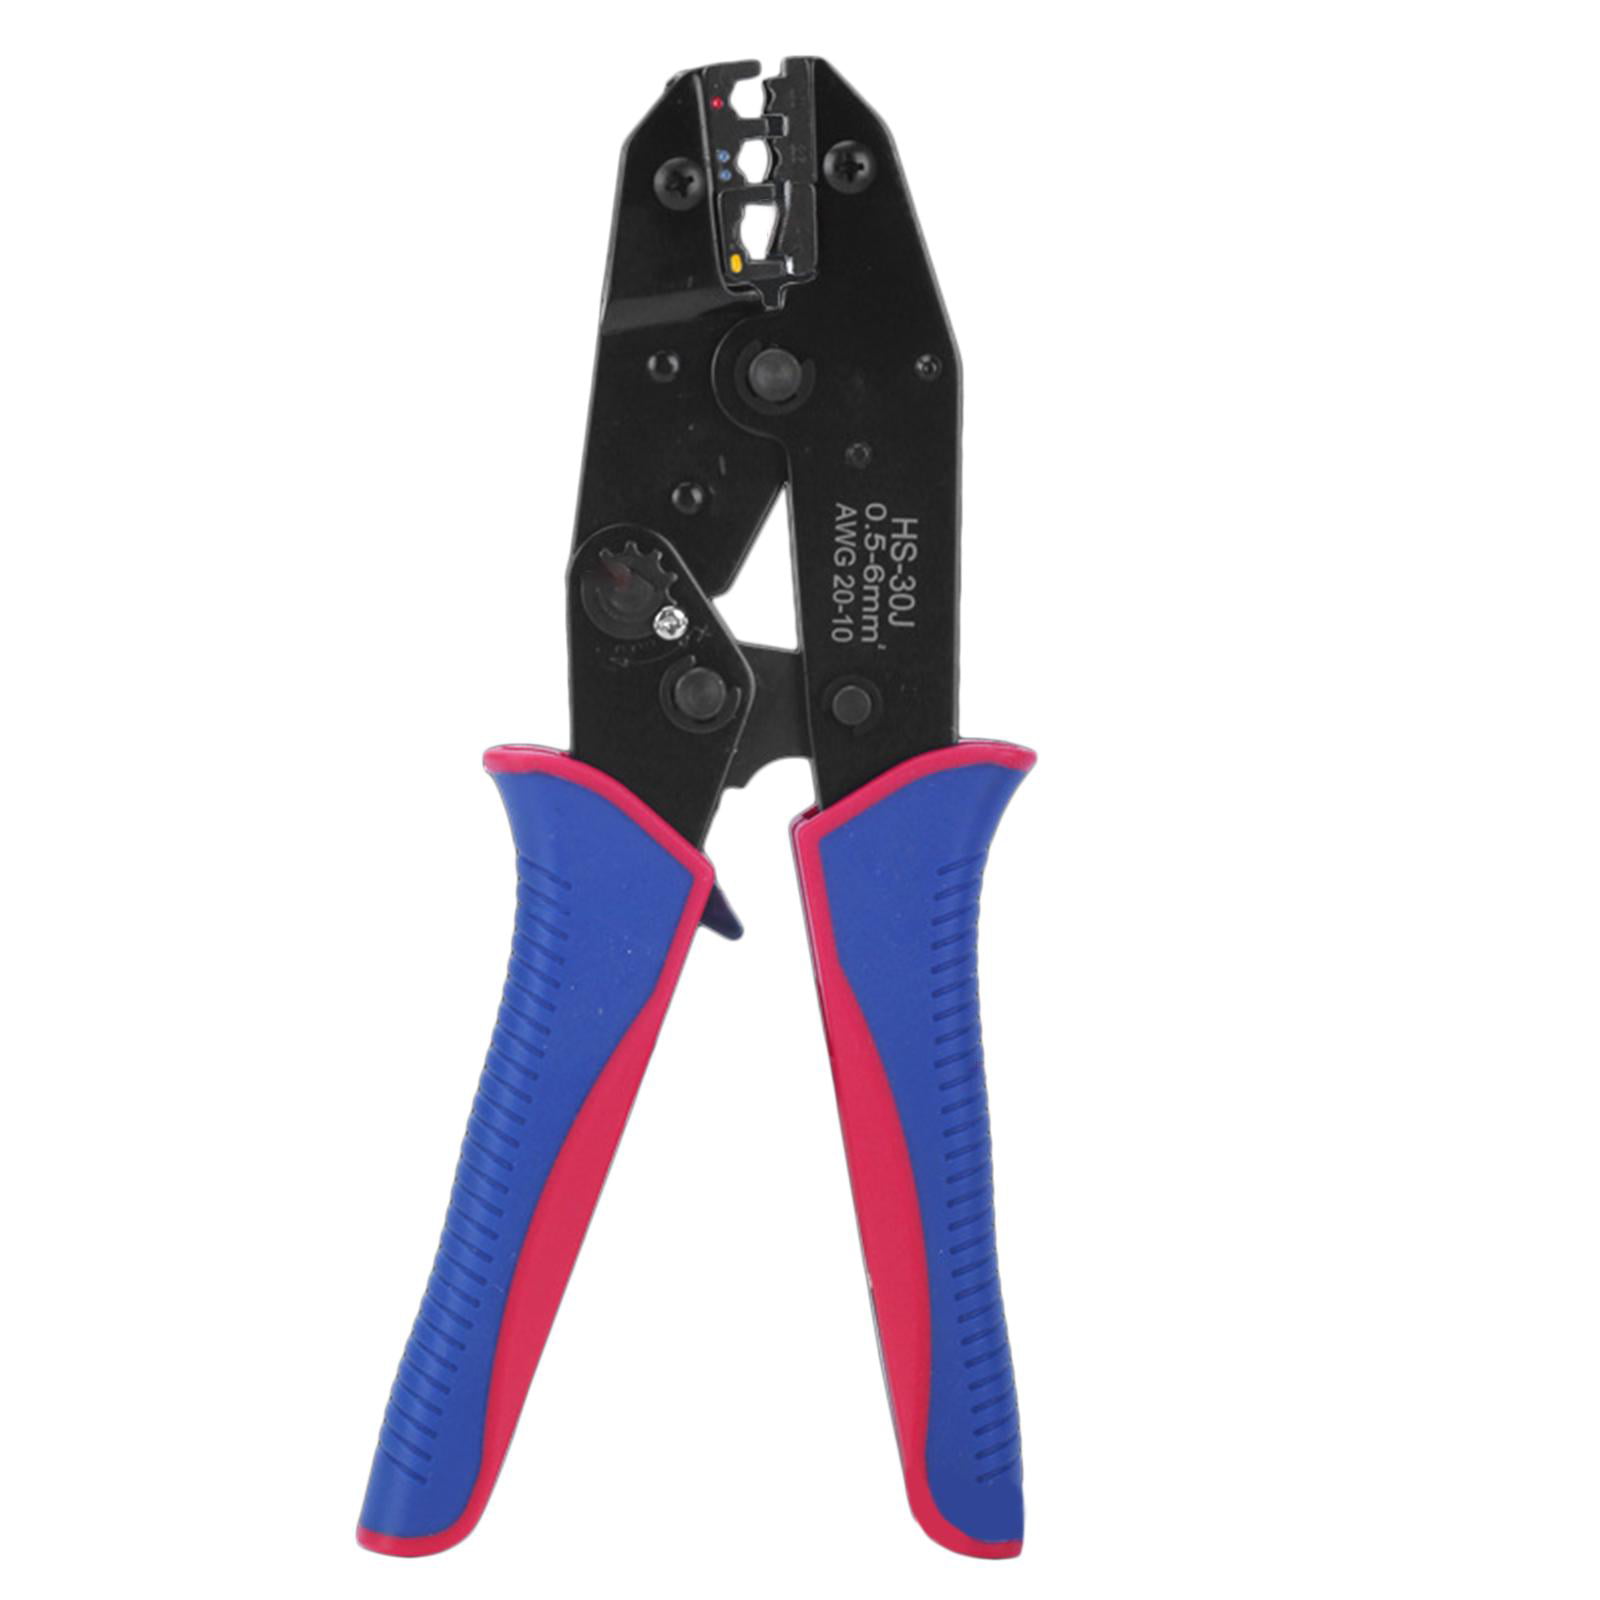 HEAVY DUTY CABLE WIRE CRIMPING TOOL RATCHET PLIERS 